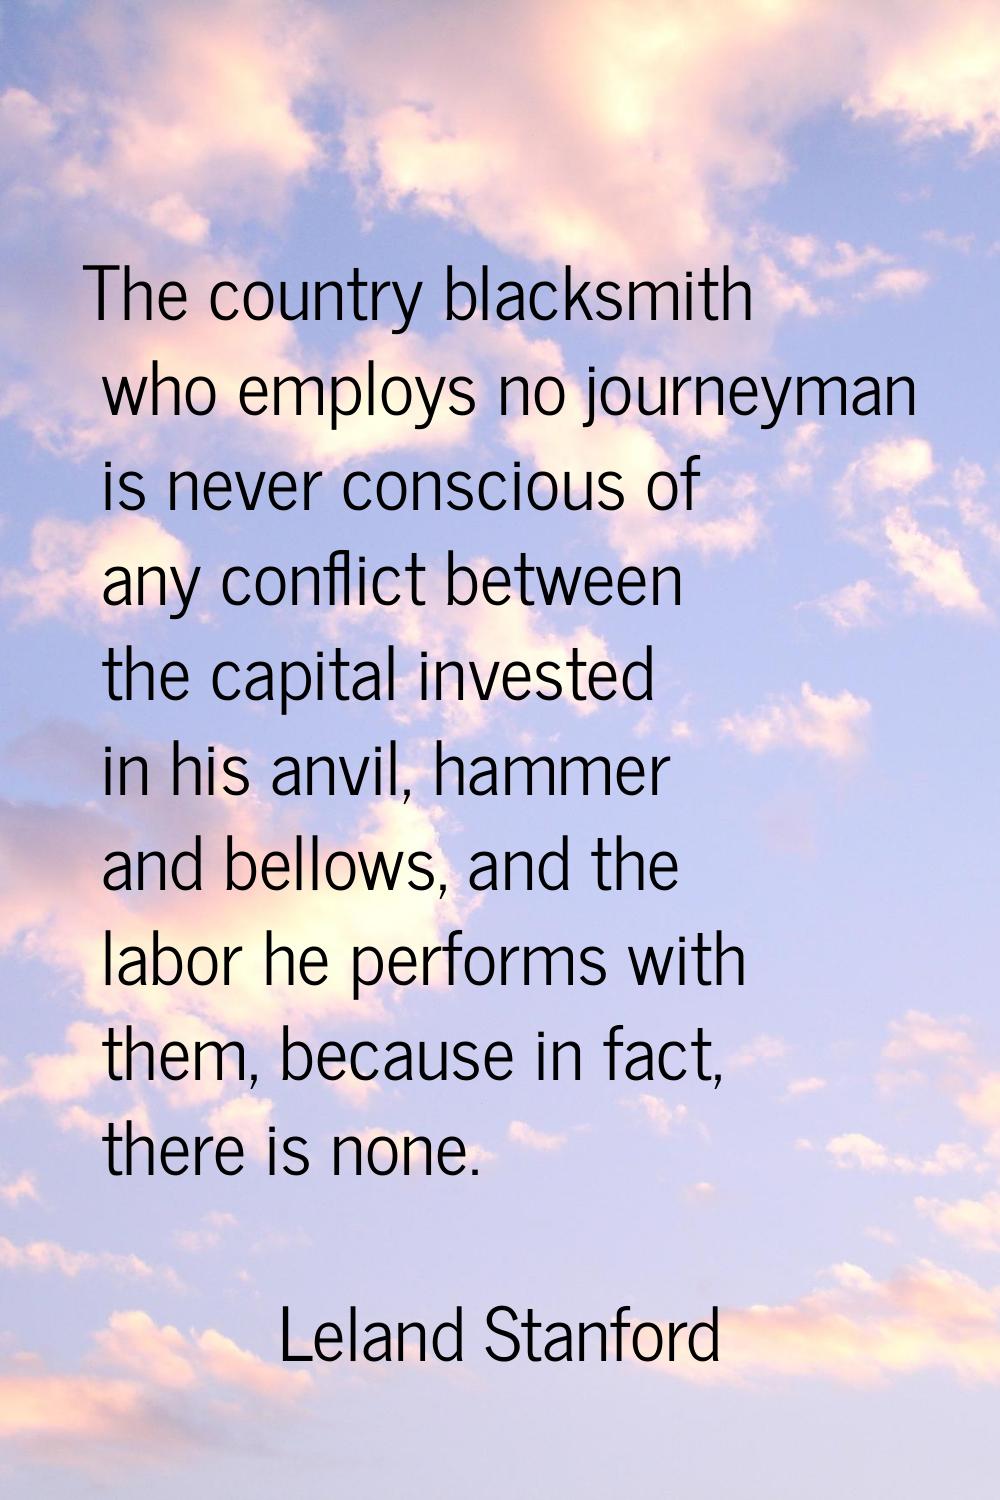 The country blacksmith who employs no journeyman is never conscious of any conflict between the cap